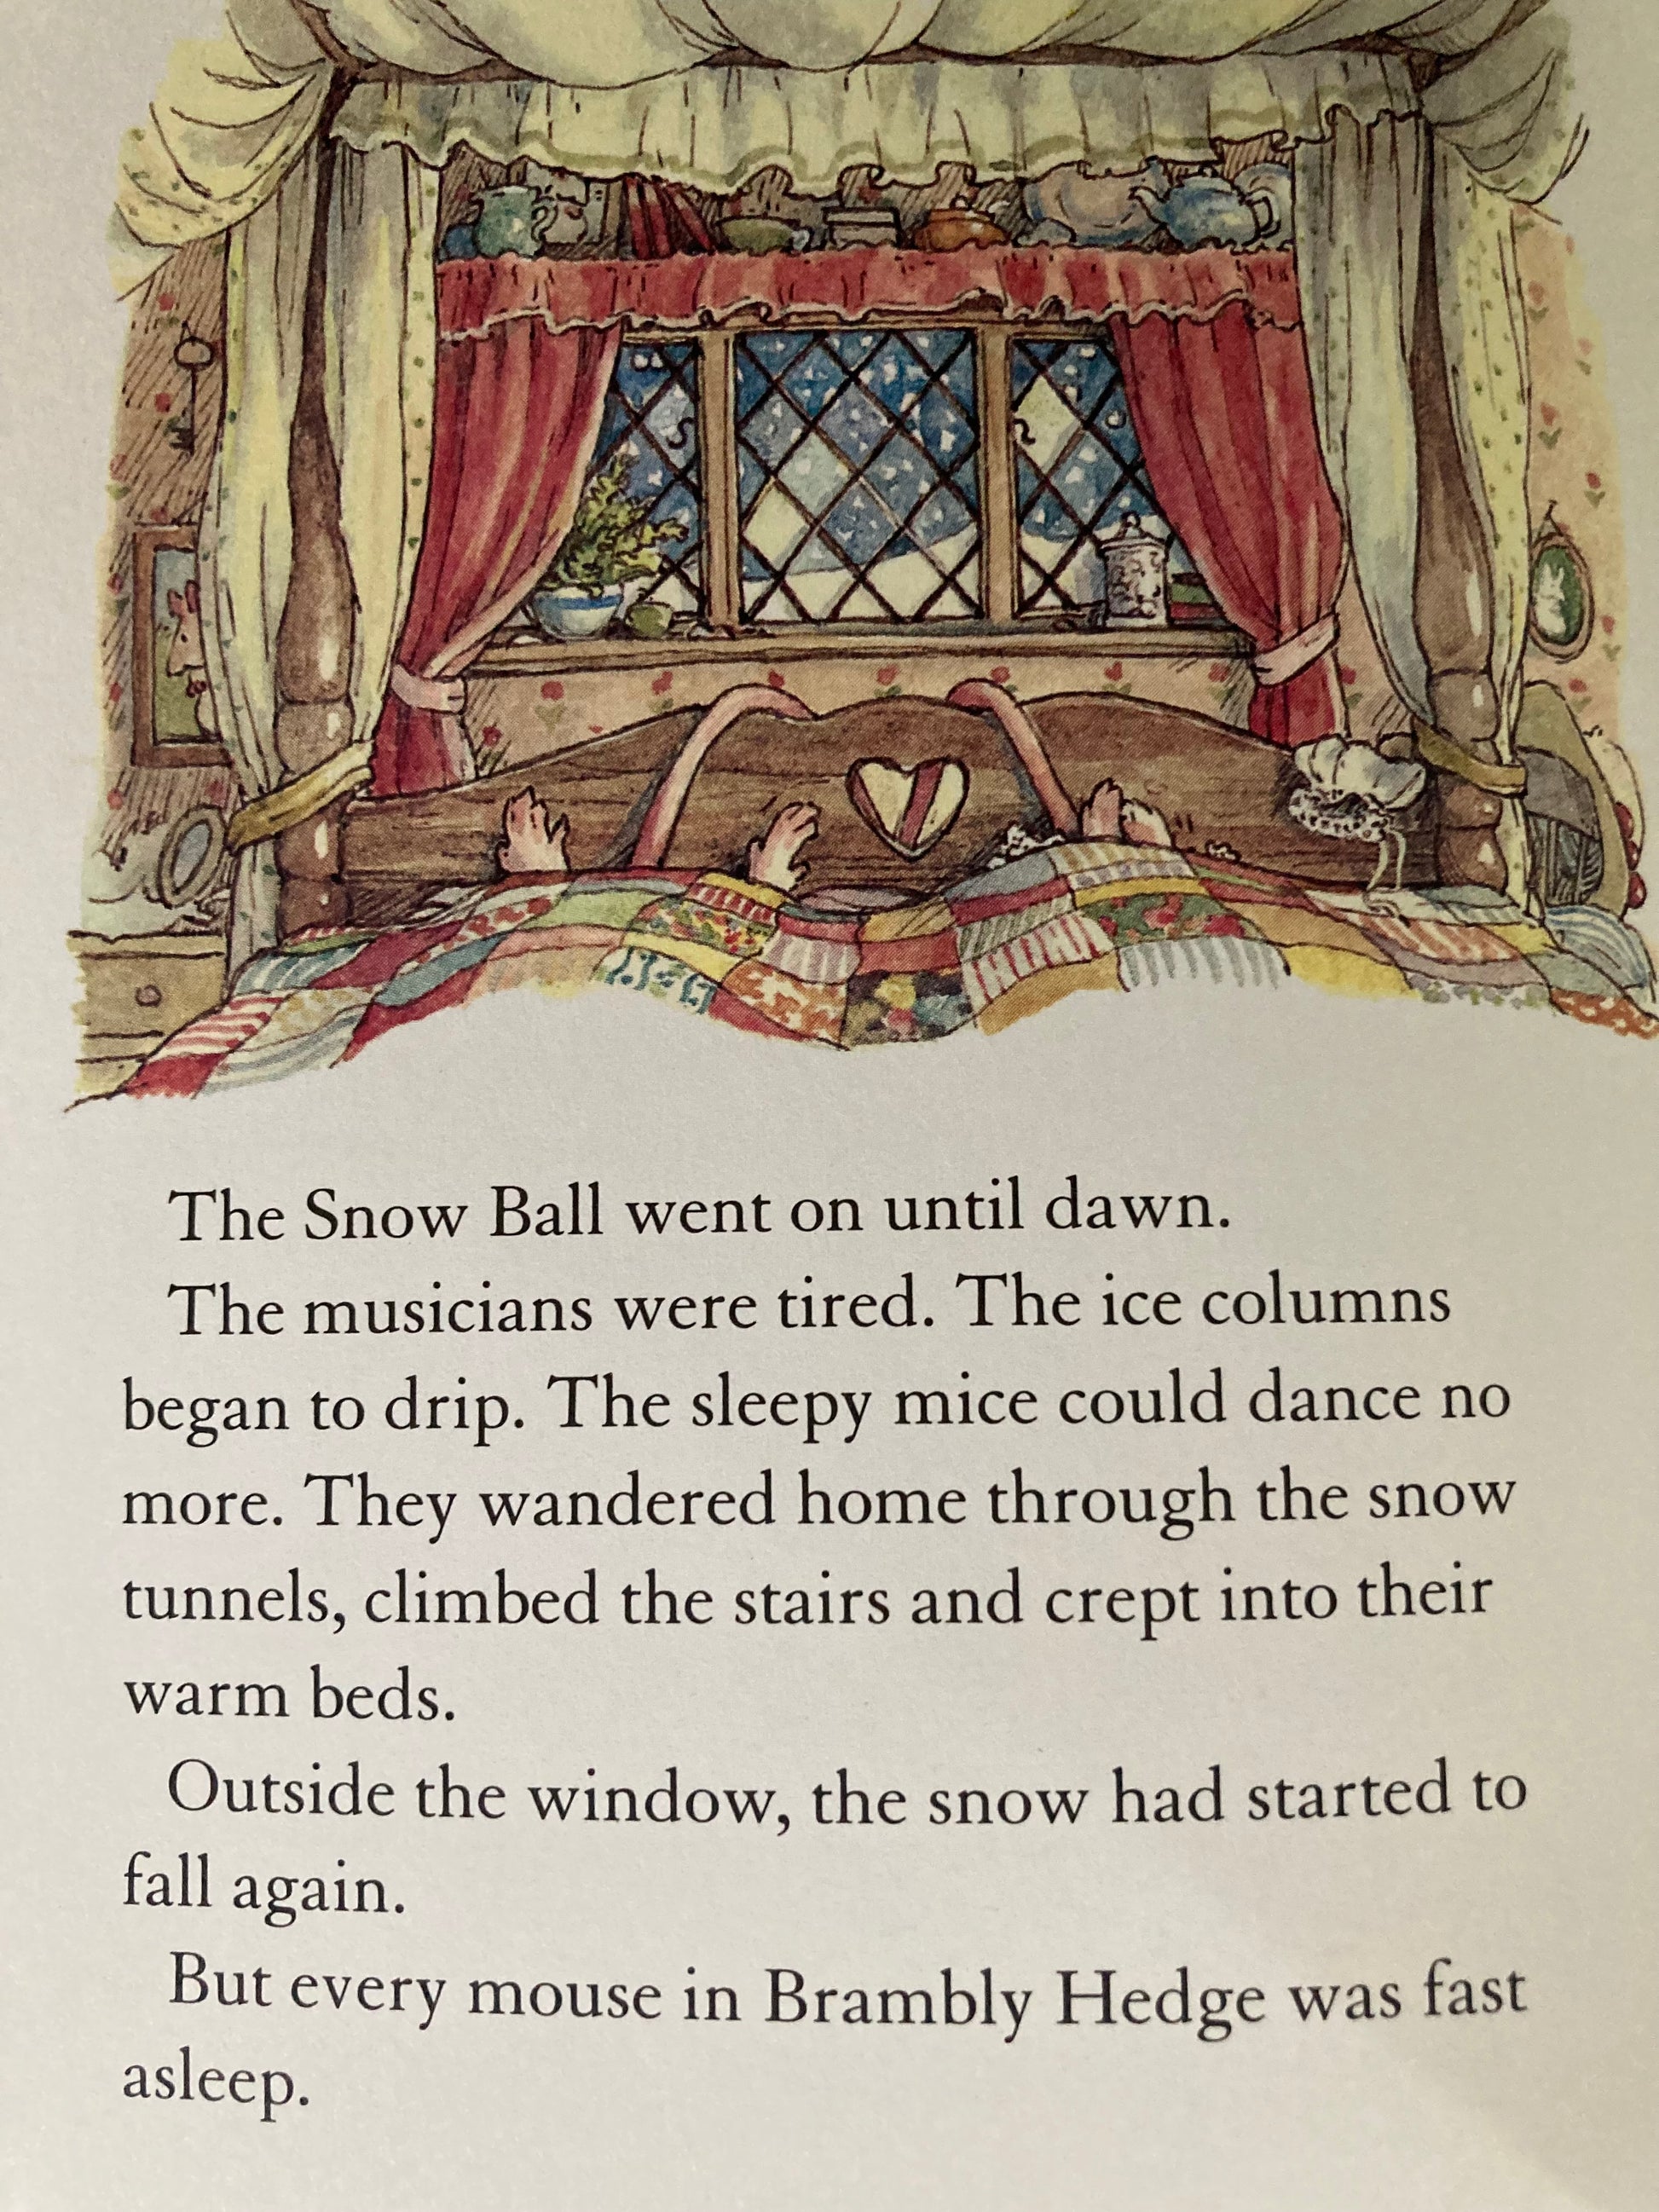 Museums and Galleries Brambly Hedge Winter Story Pack of 12